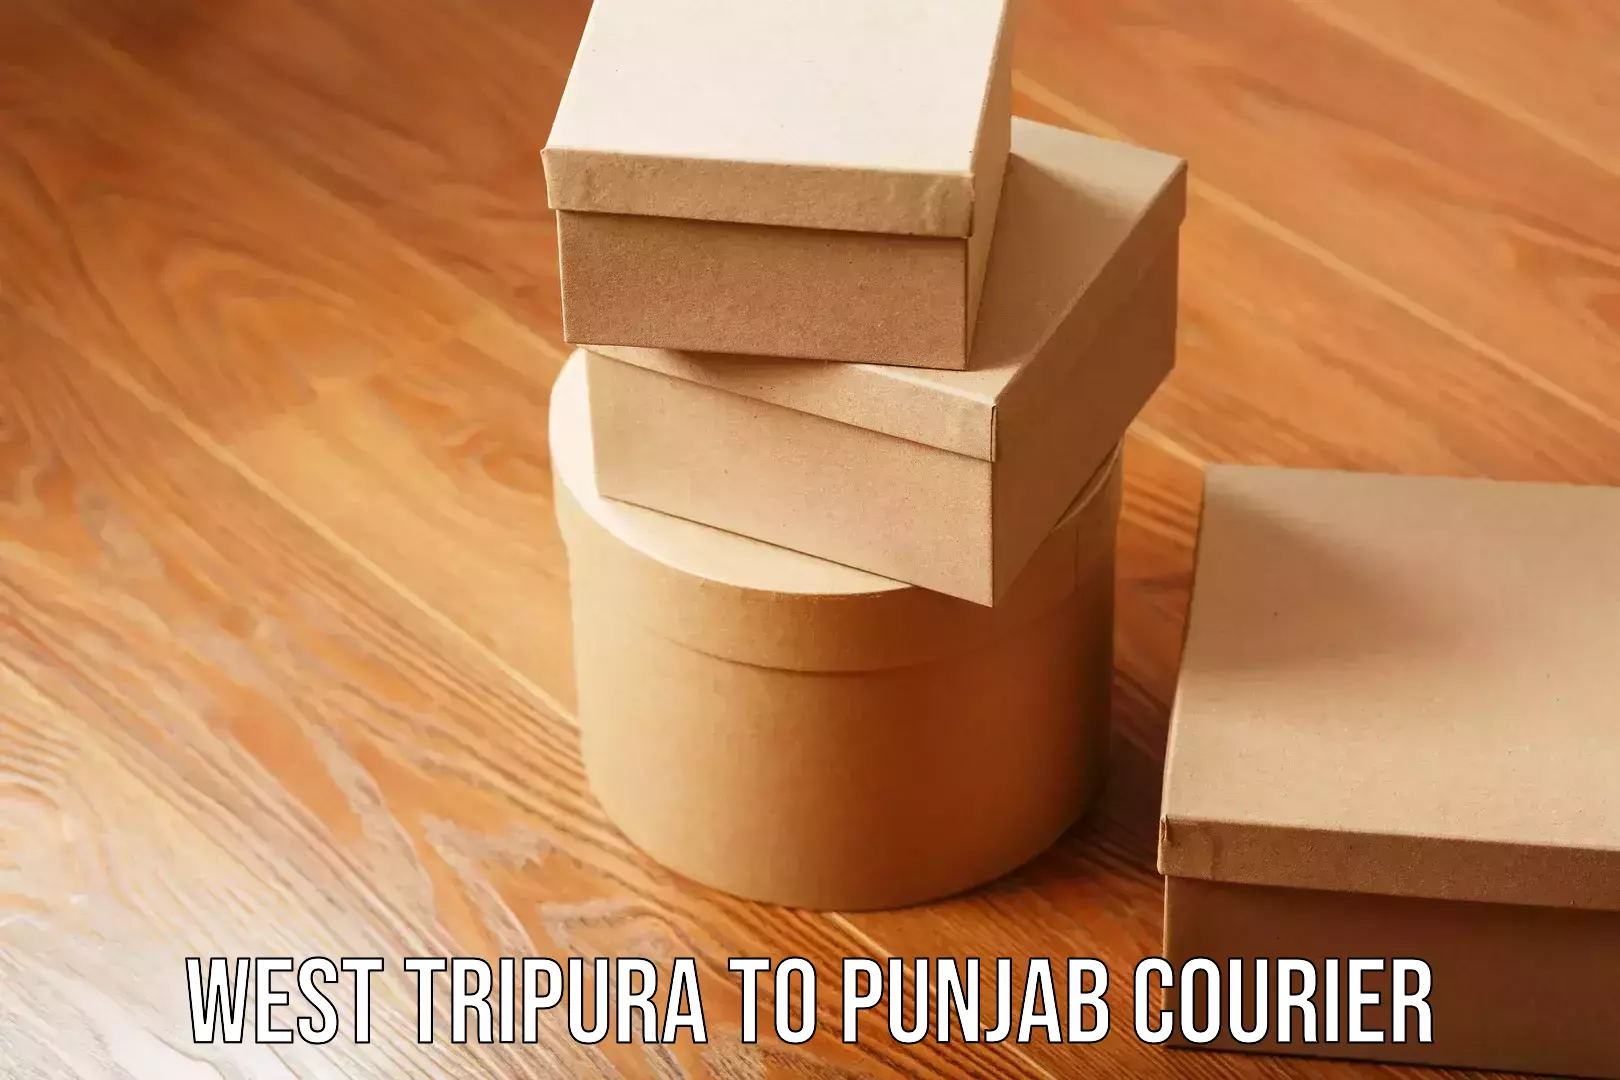 Flexible delivery schedules West Tripura to Punjab